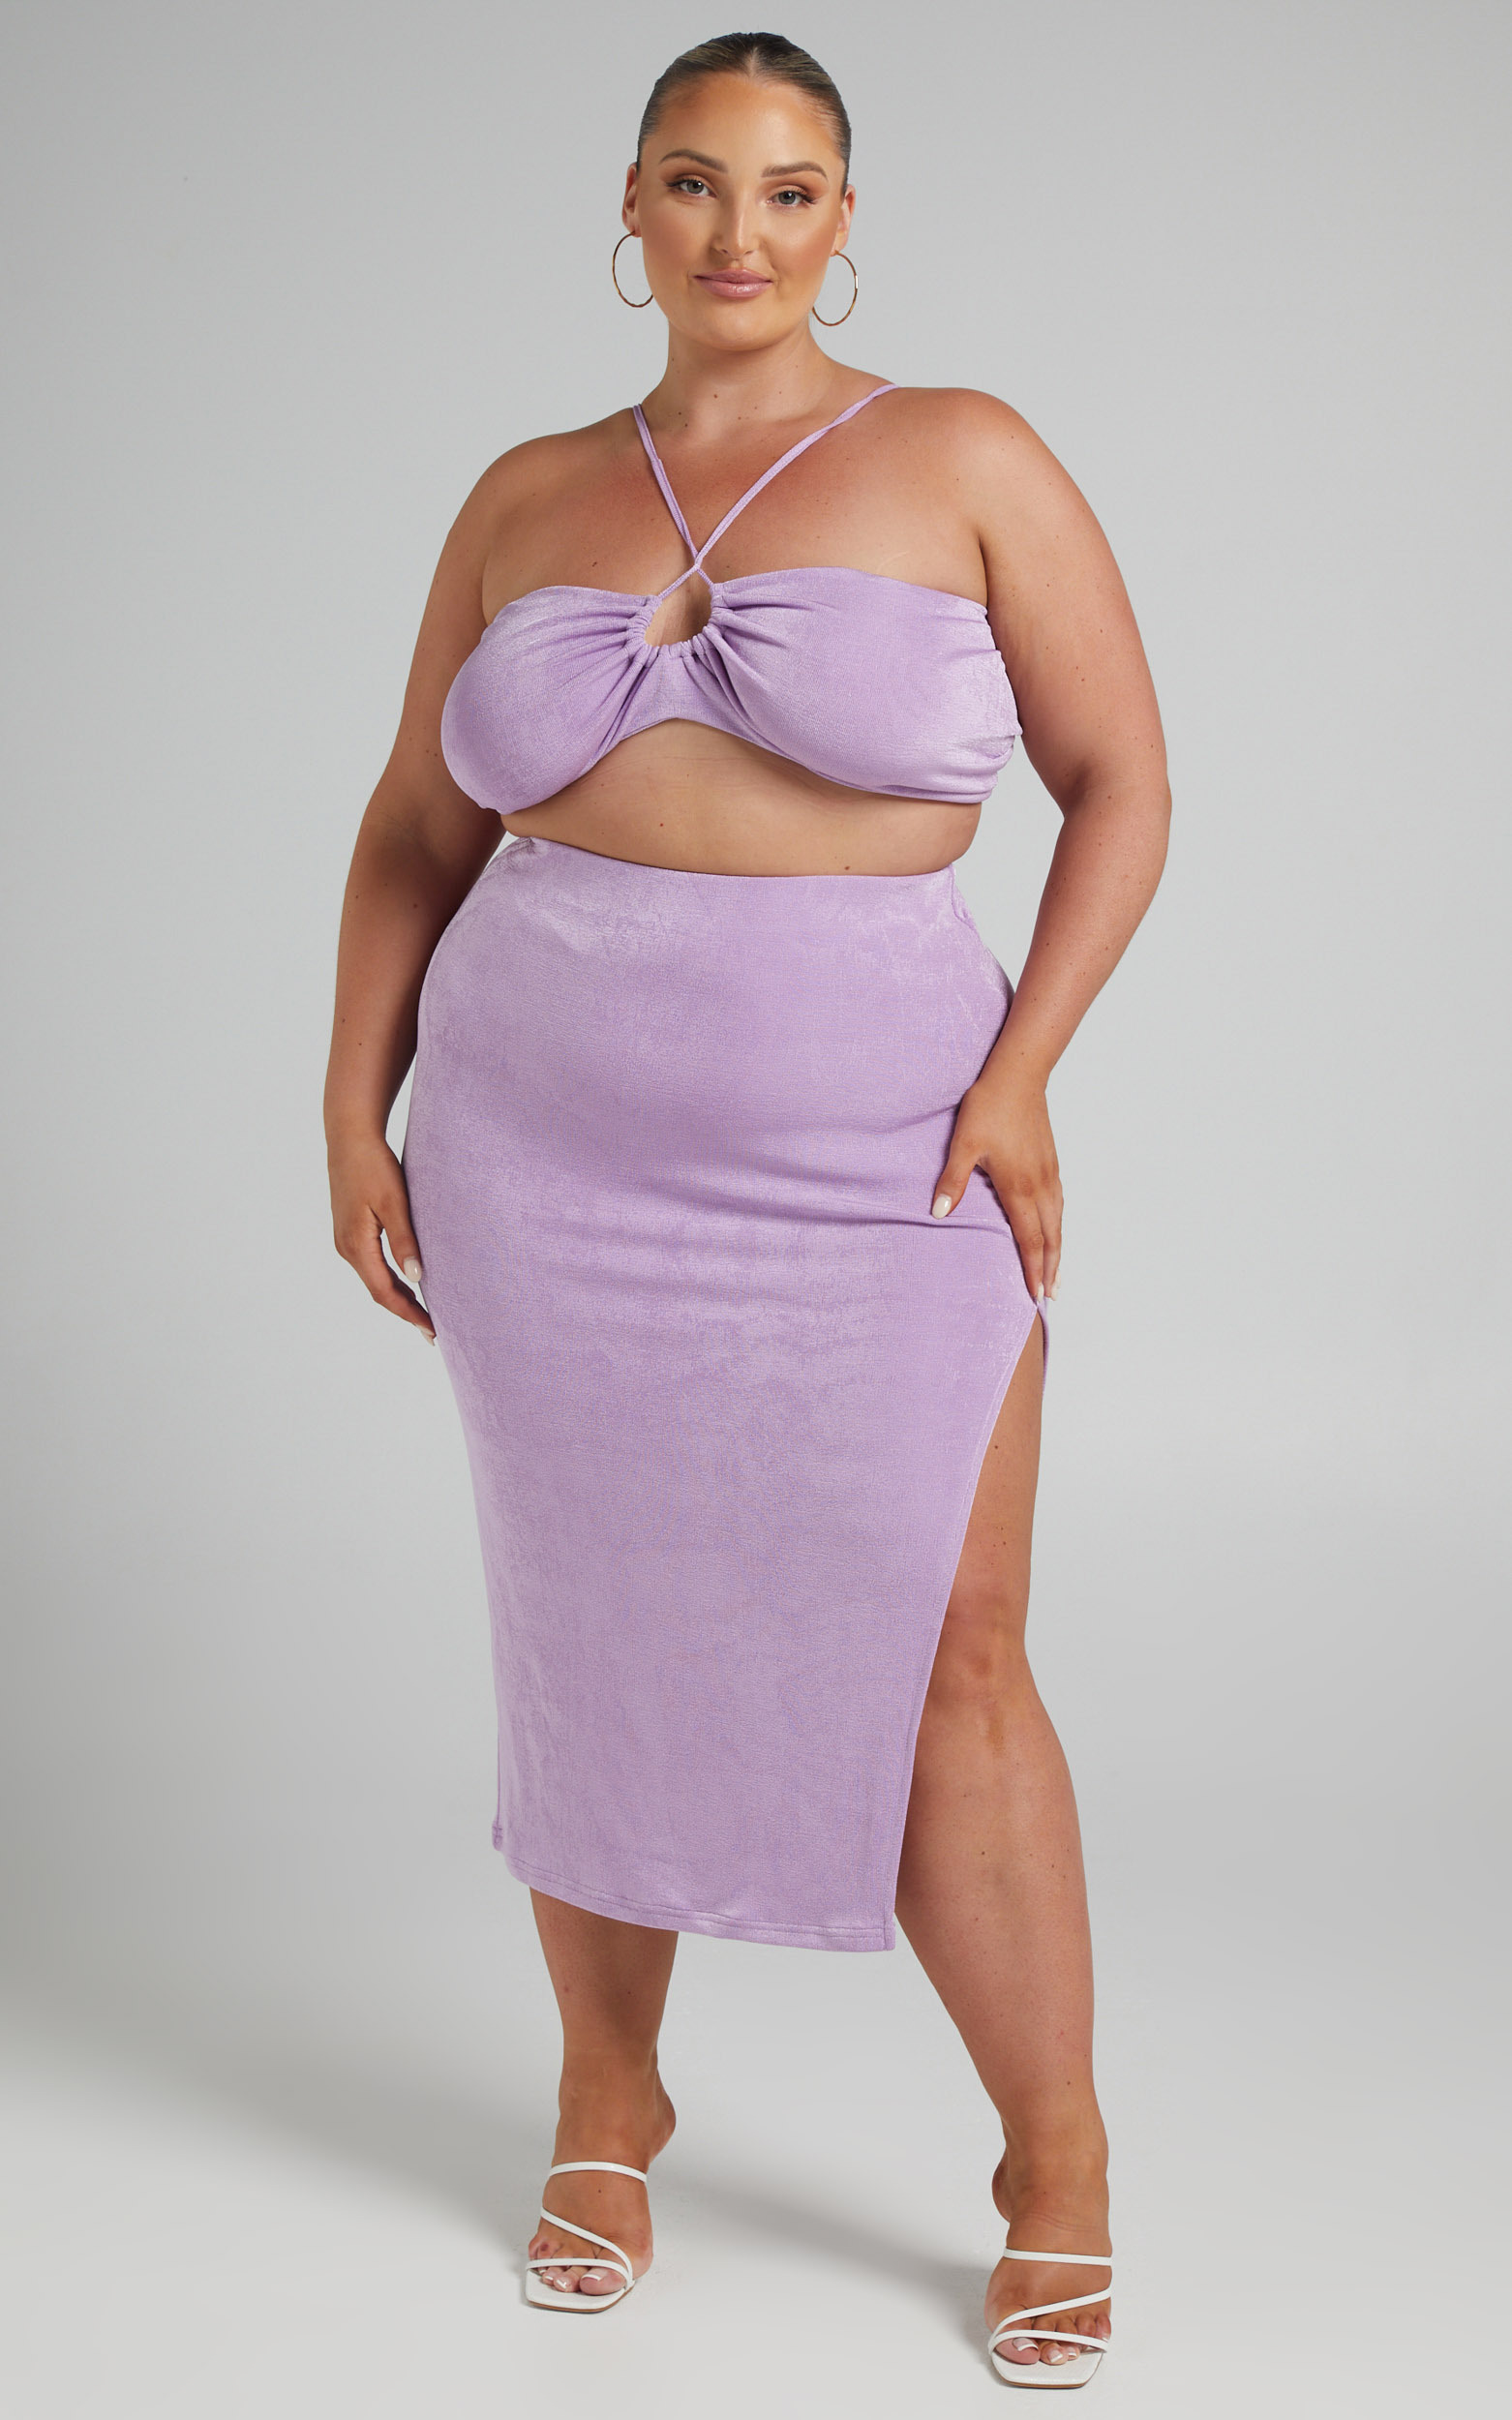 Geneva Bandeau Top Midi Skirt Two Piece Set in Lilac - 04, PRP2, hi-res image number null